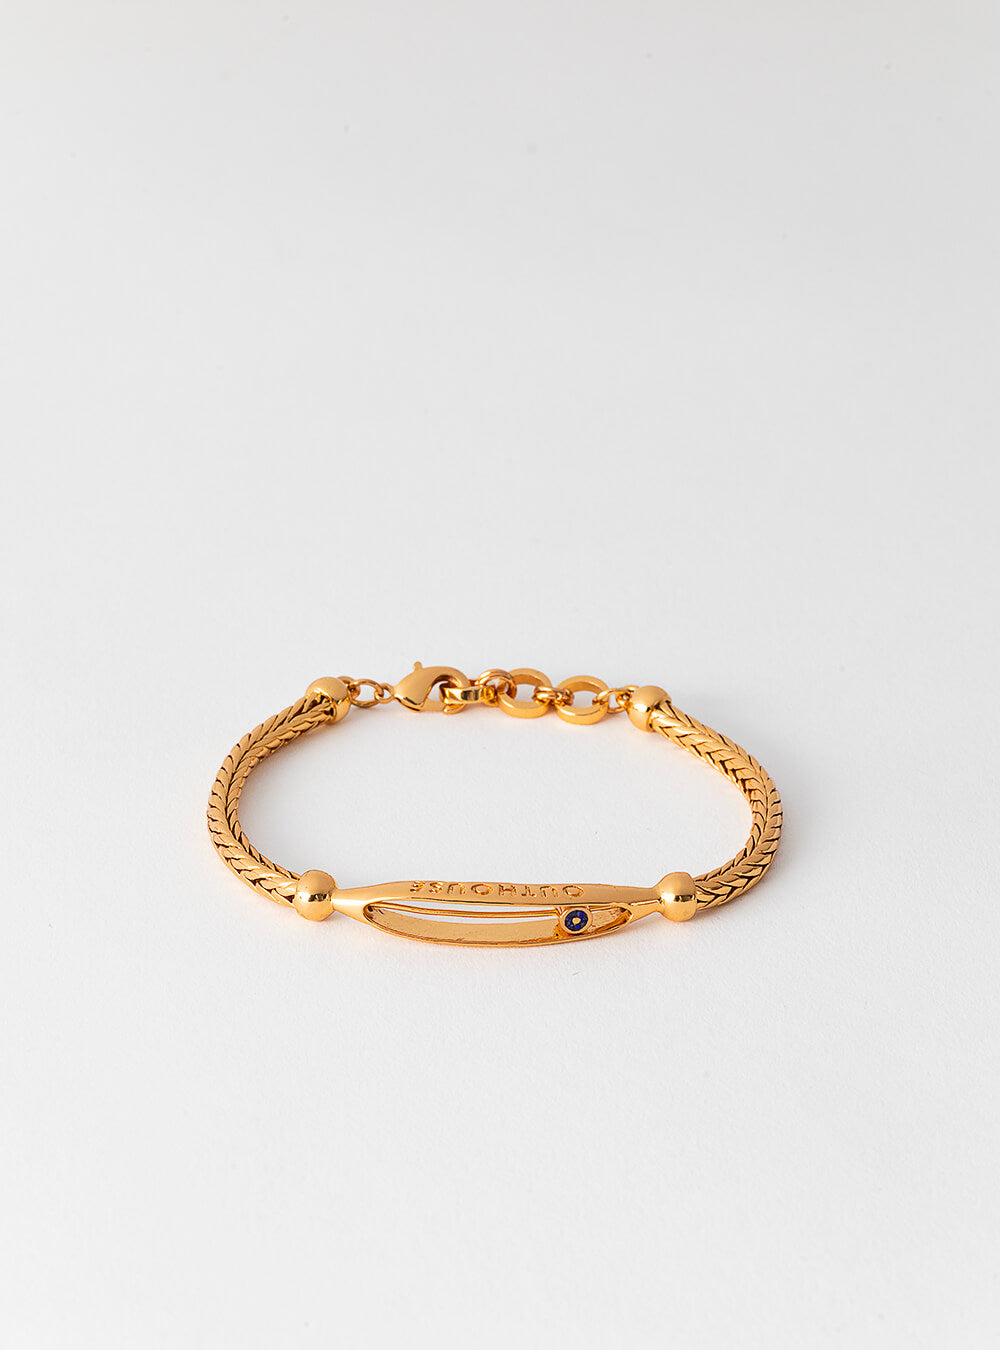 OOMPH Gold Tone S Shape Link Chain Bracelet for Women  Girls Latest  Stylish Buy OOMPH Gold Tone S Shape Link Chain Bracelet for Women   Girls Latest Stylish Online at Best